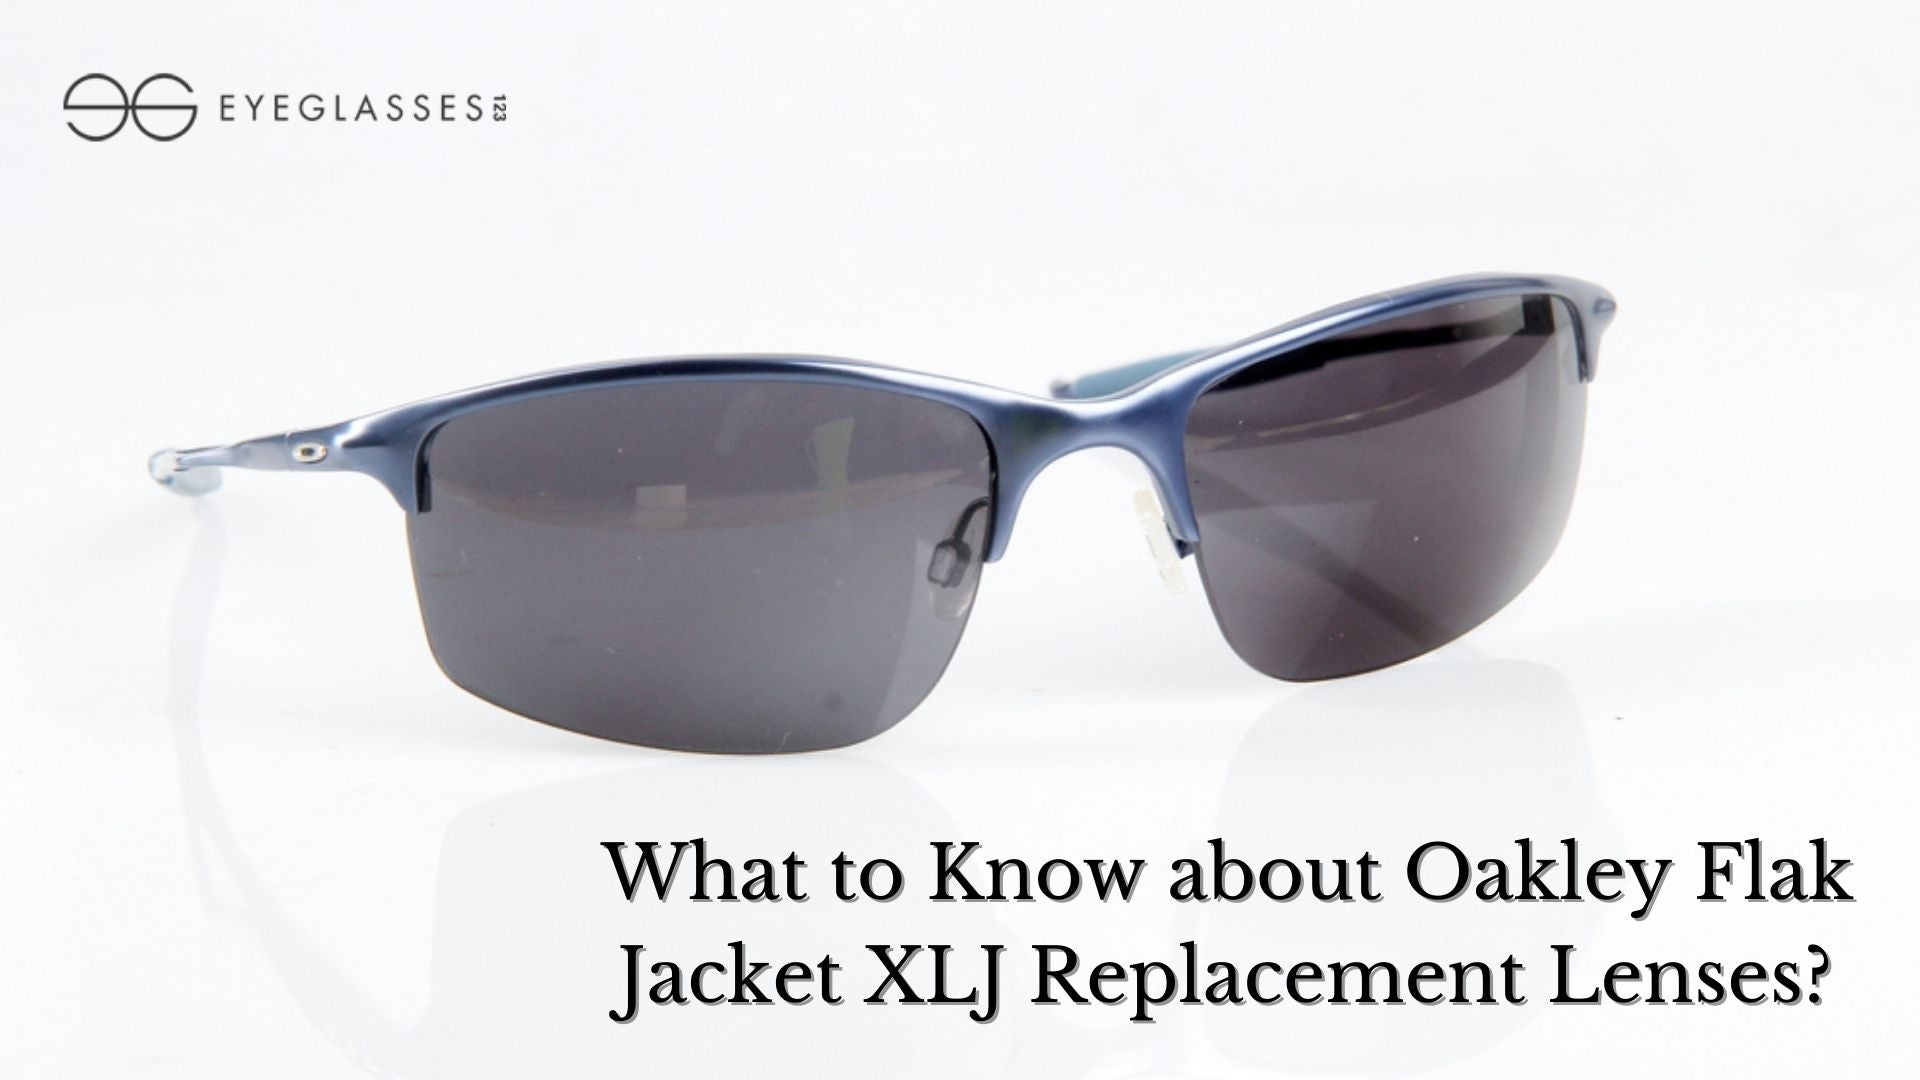 What to Know about Oakley Flak Jacket XLJ Replacement Lenses?